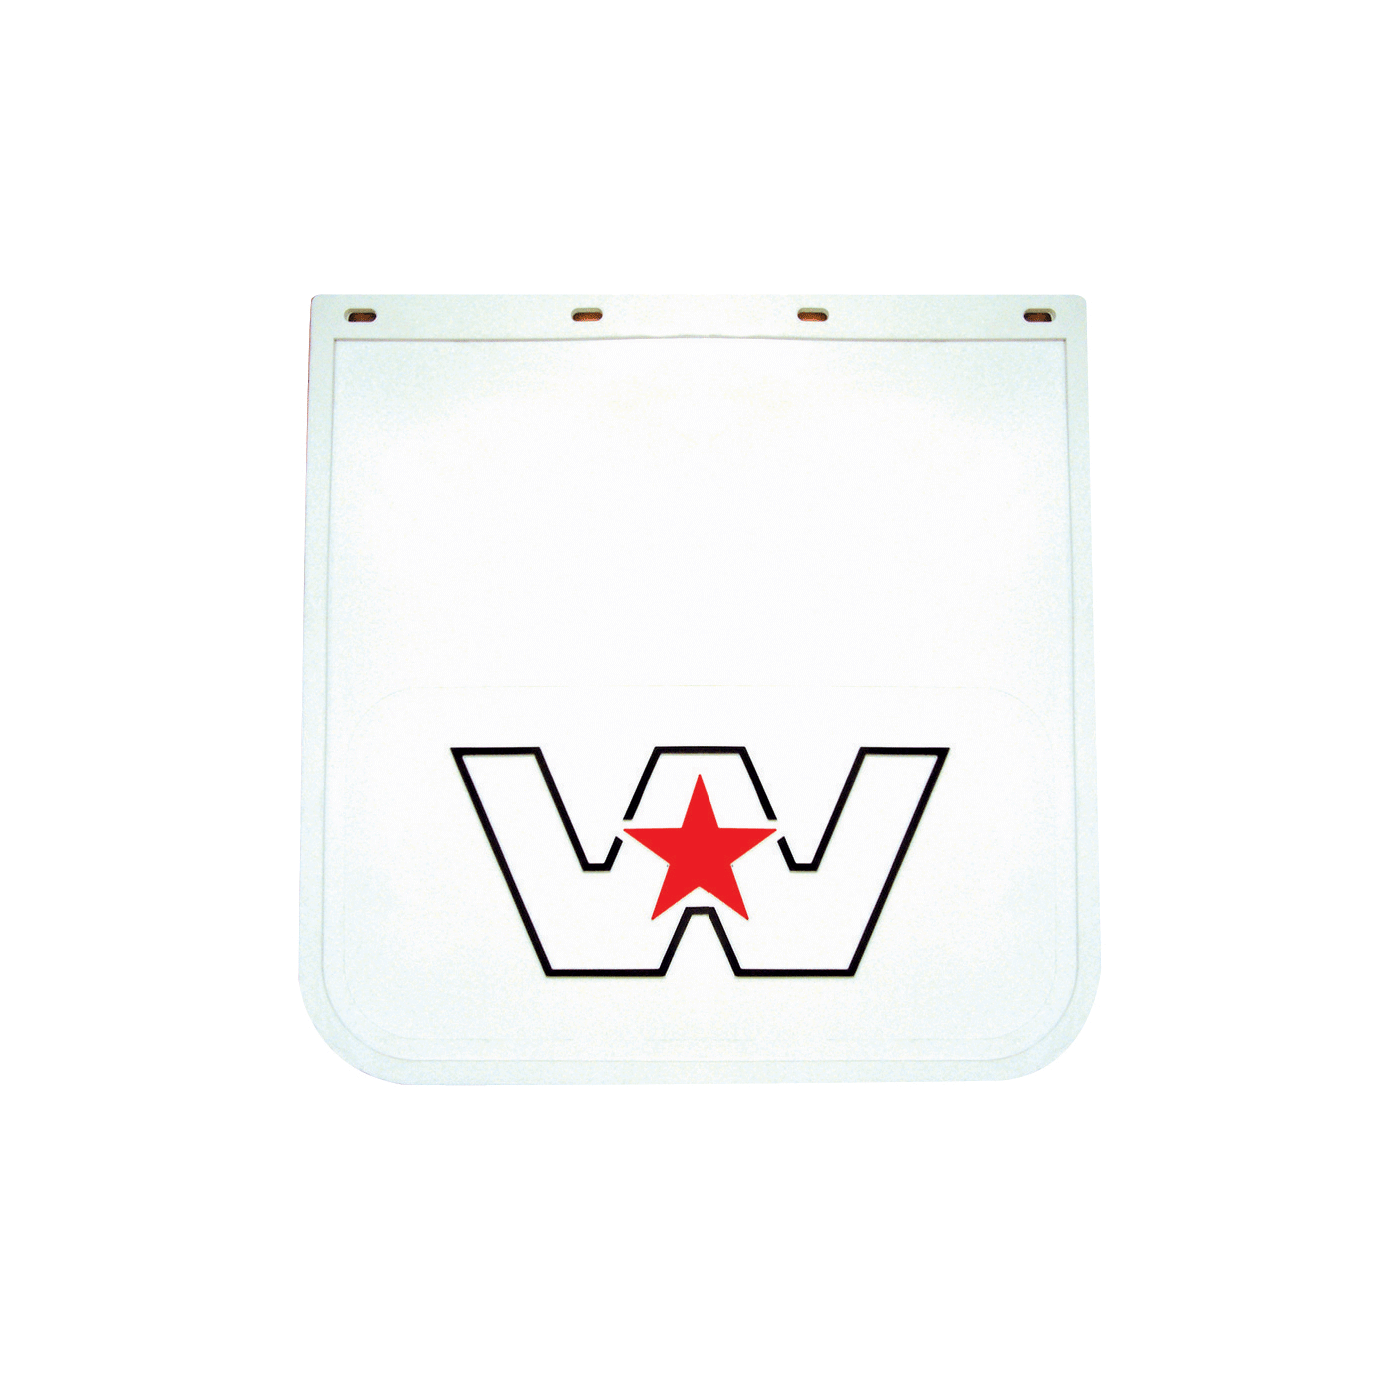 Mudflap 24X18 white with red star 463014014